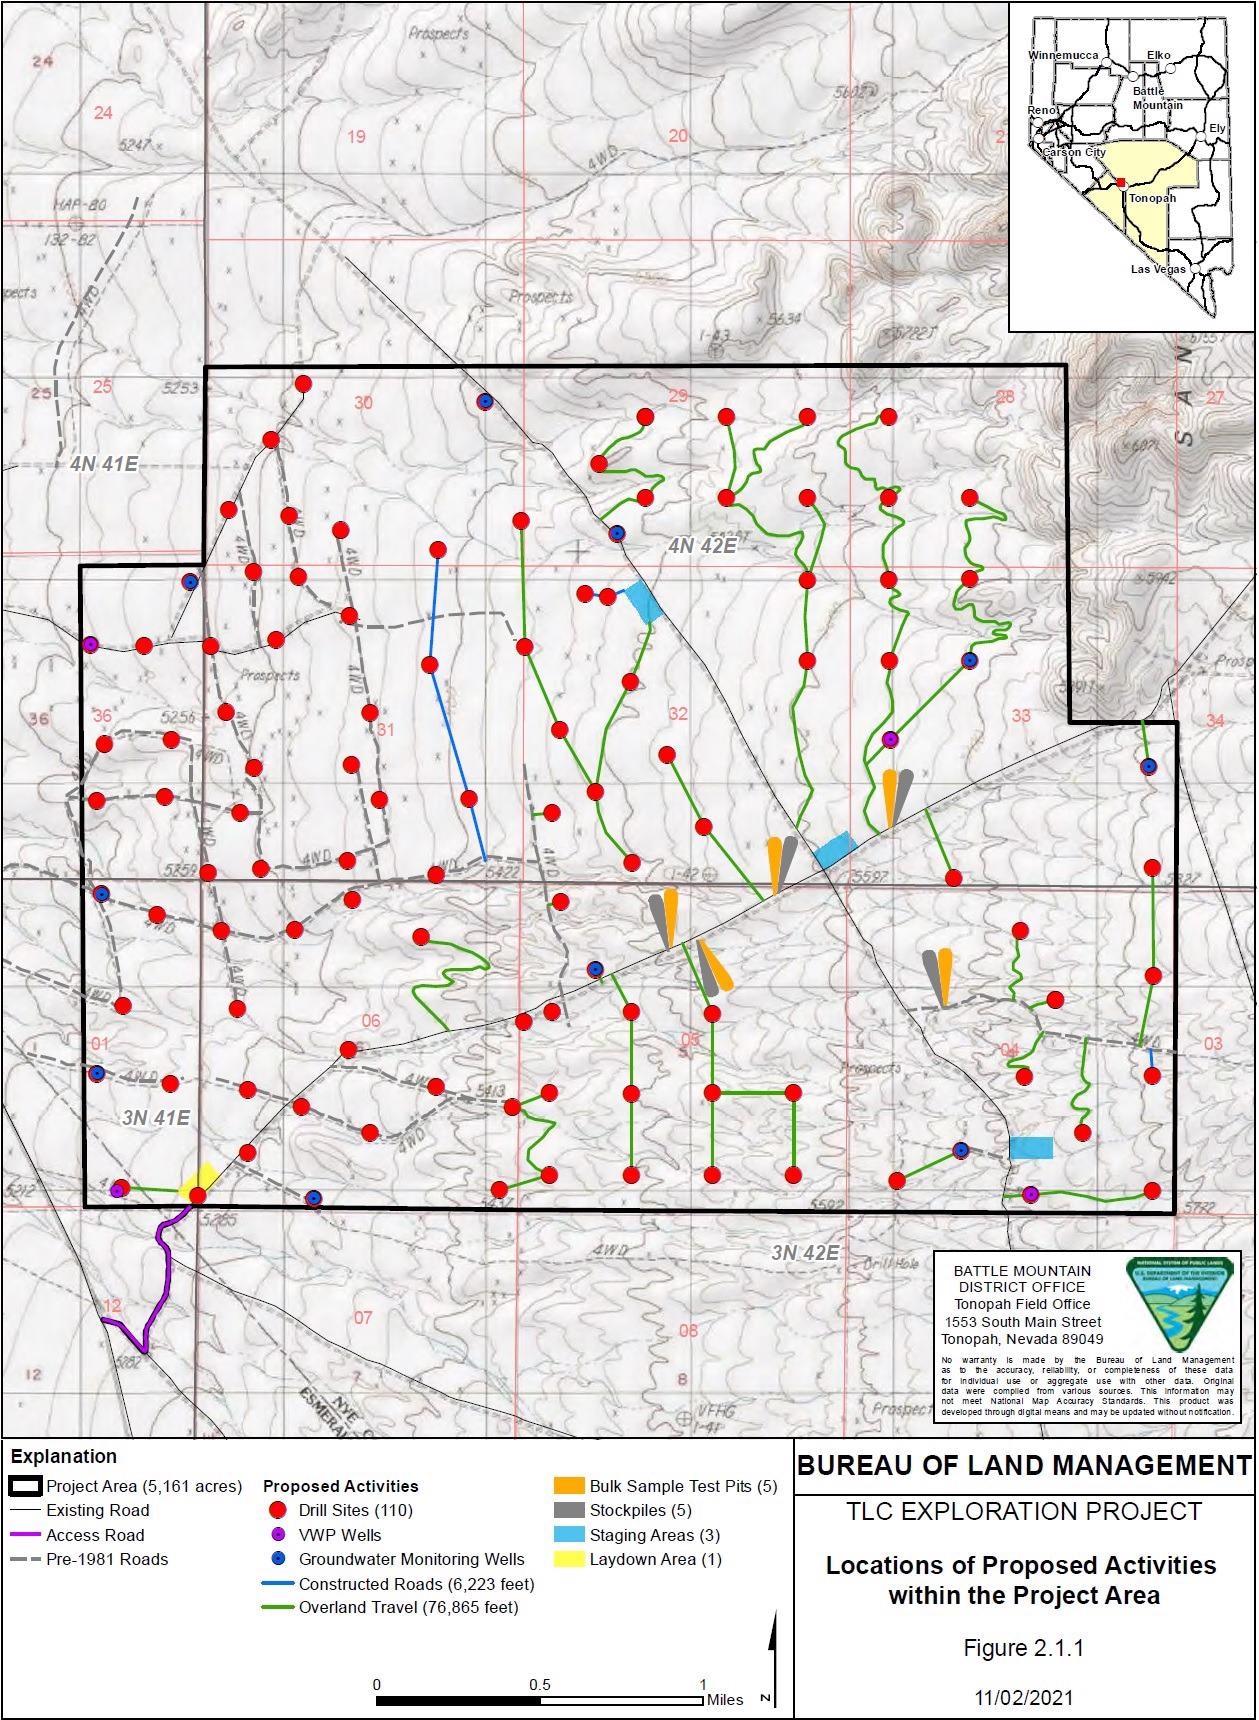 American Lithium Begins Drilling at TLC Upon Receiving Plan of Operations and Reclamation Permit Approvals.